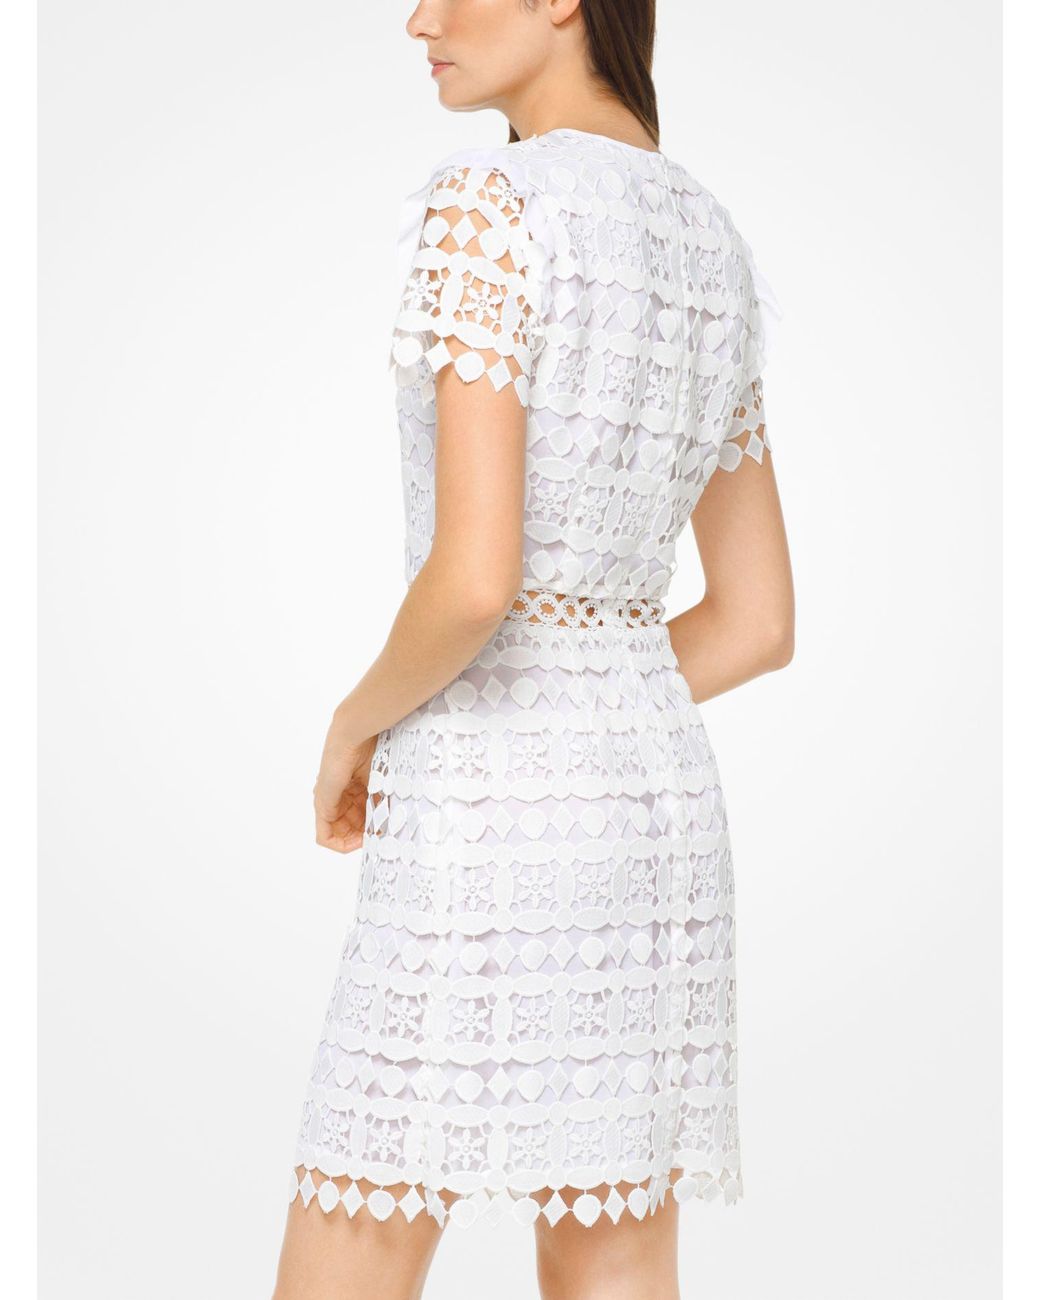 Michael Kors Geometric Floral Lace Dress in White | Lyst